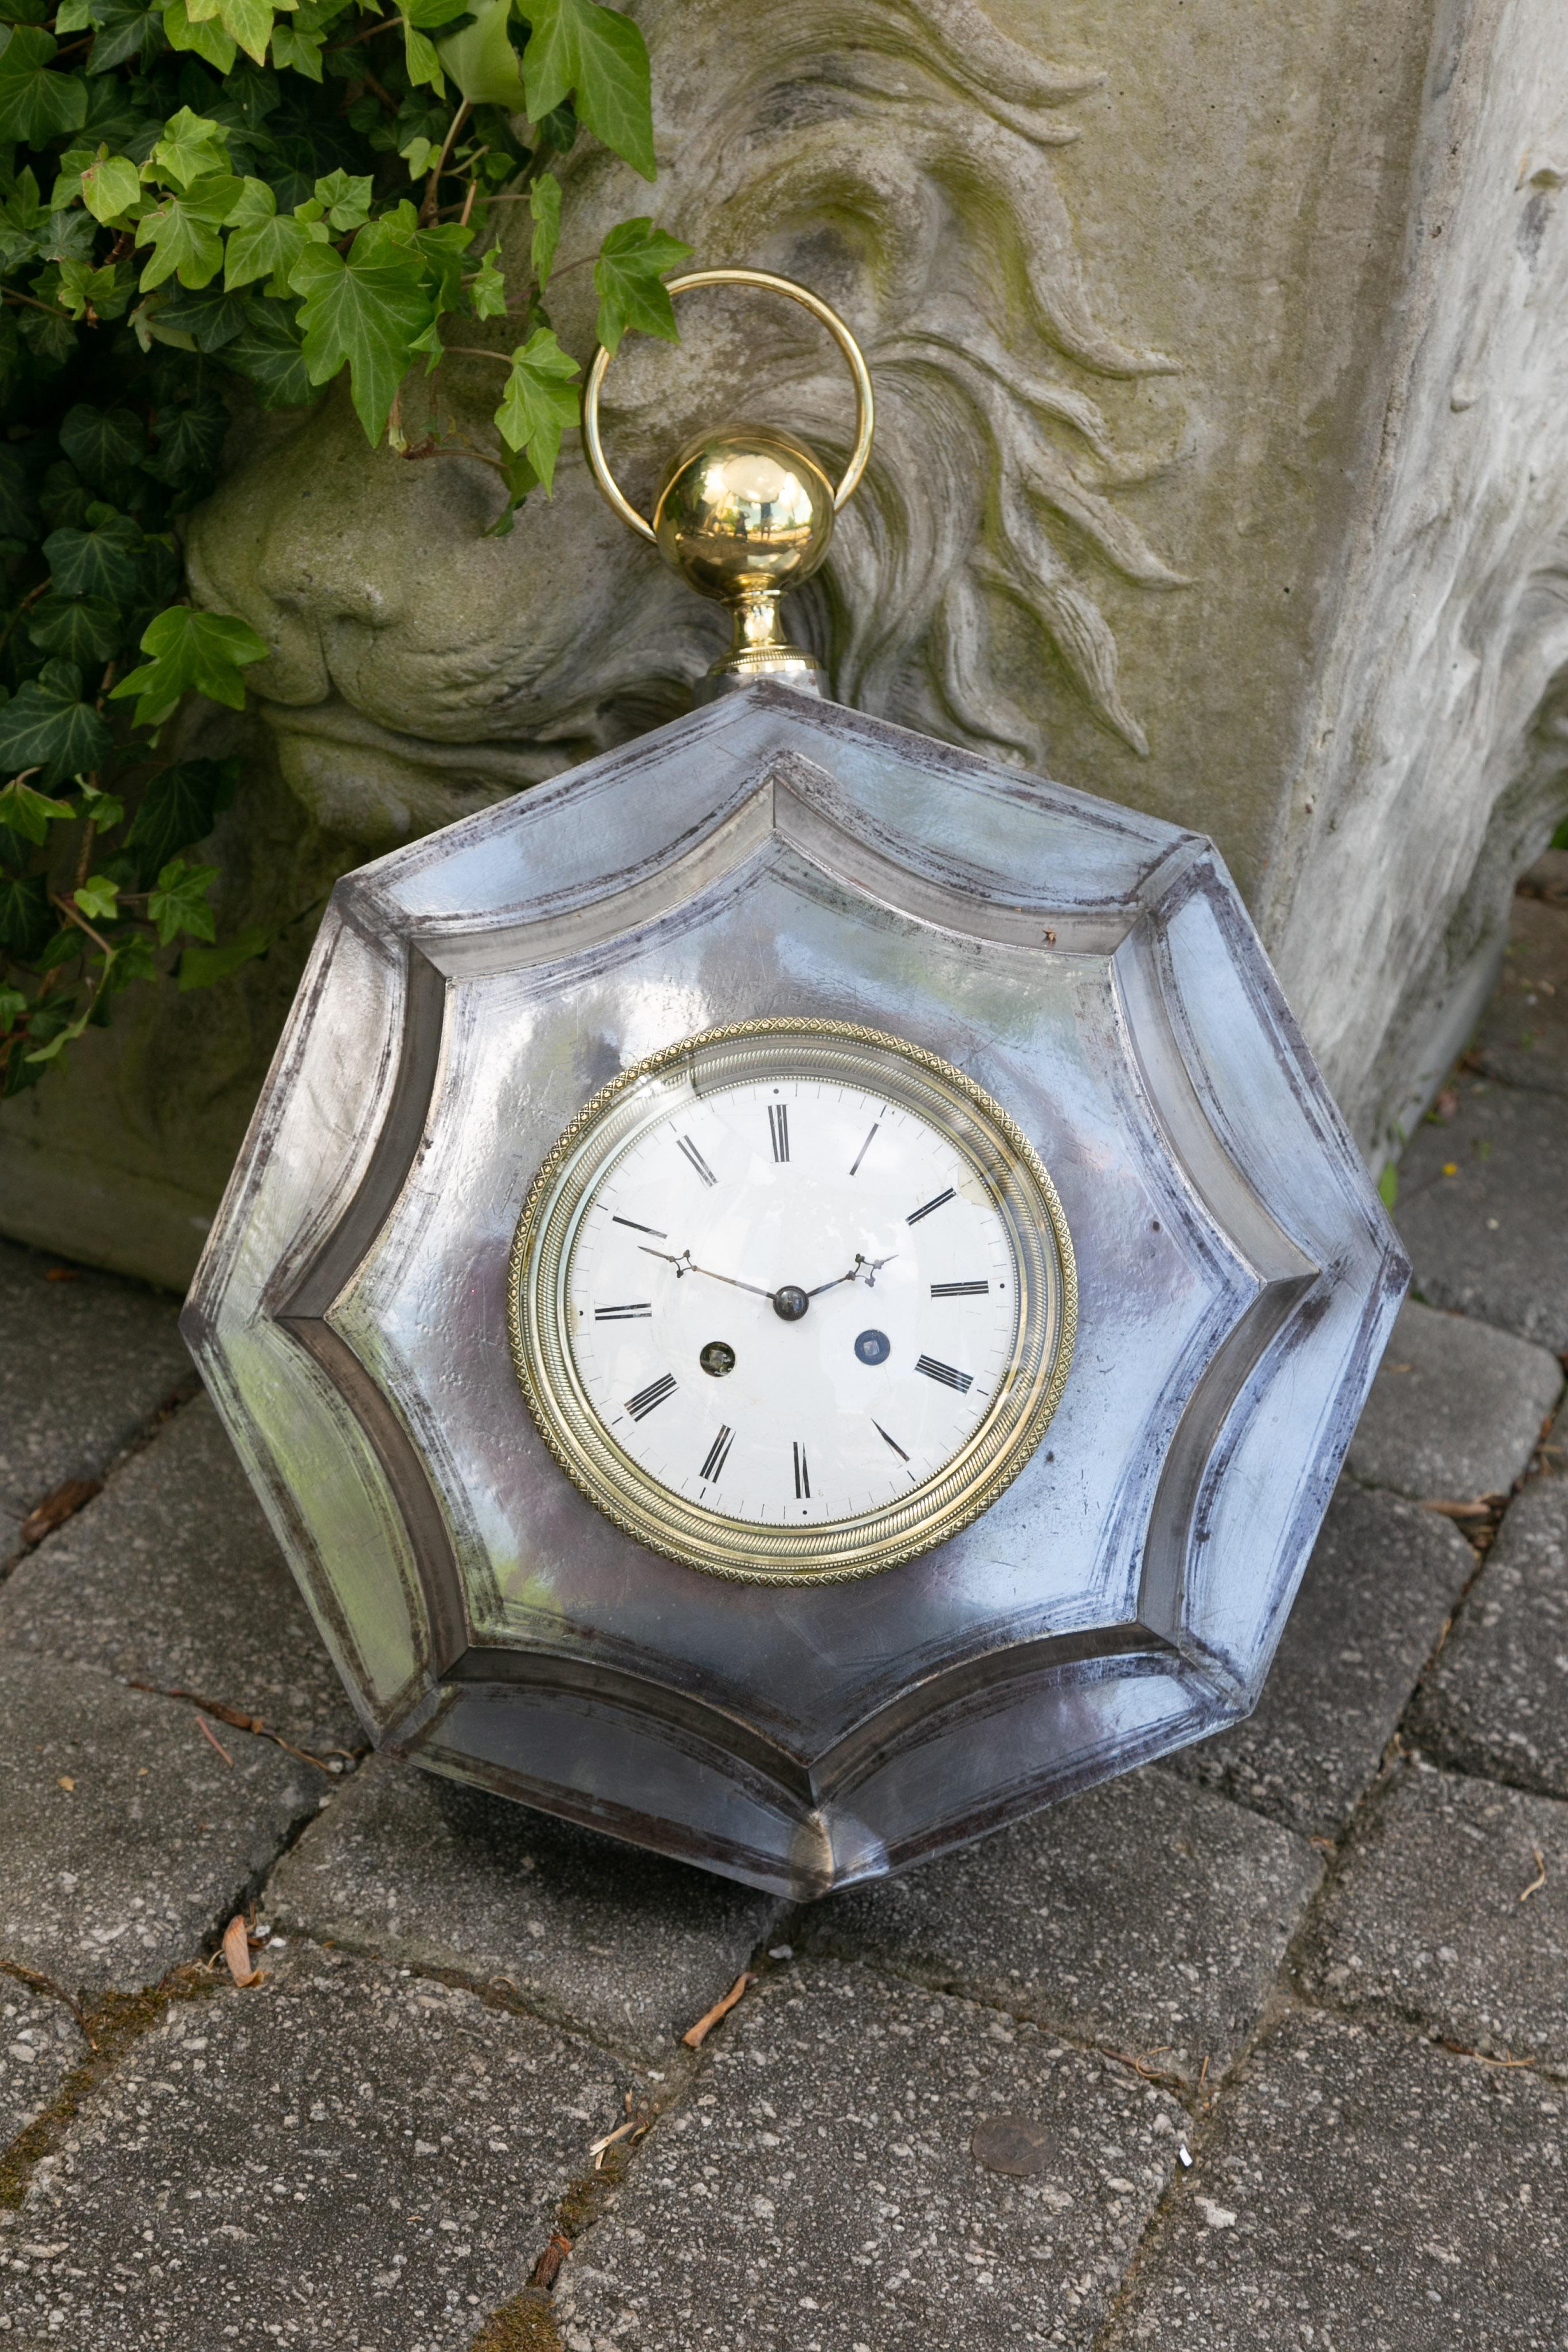 A French polished steel octagonal wall clock from the late 19th century, with brass accents. Created in France at the end of the reign of Emperor Napoleon III's reign, this wall clock features an octagonal polished steel frame highlighted with brass